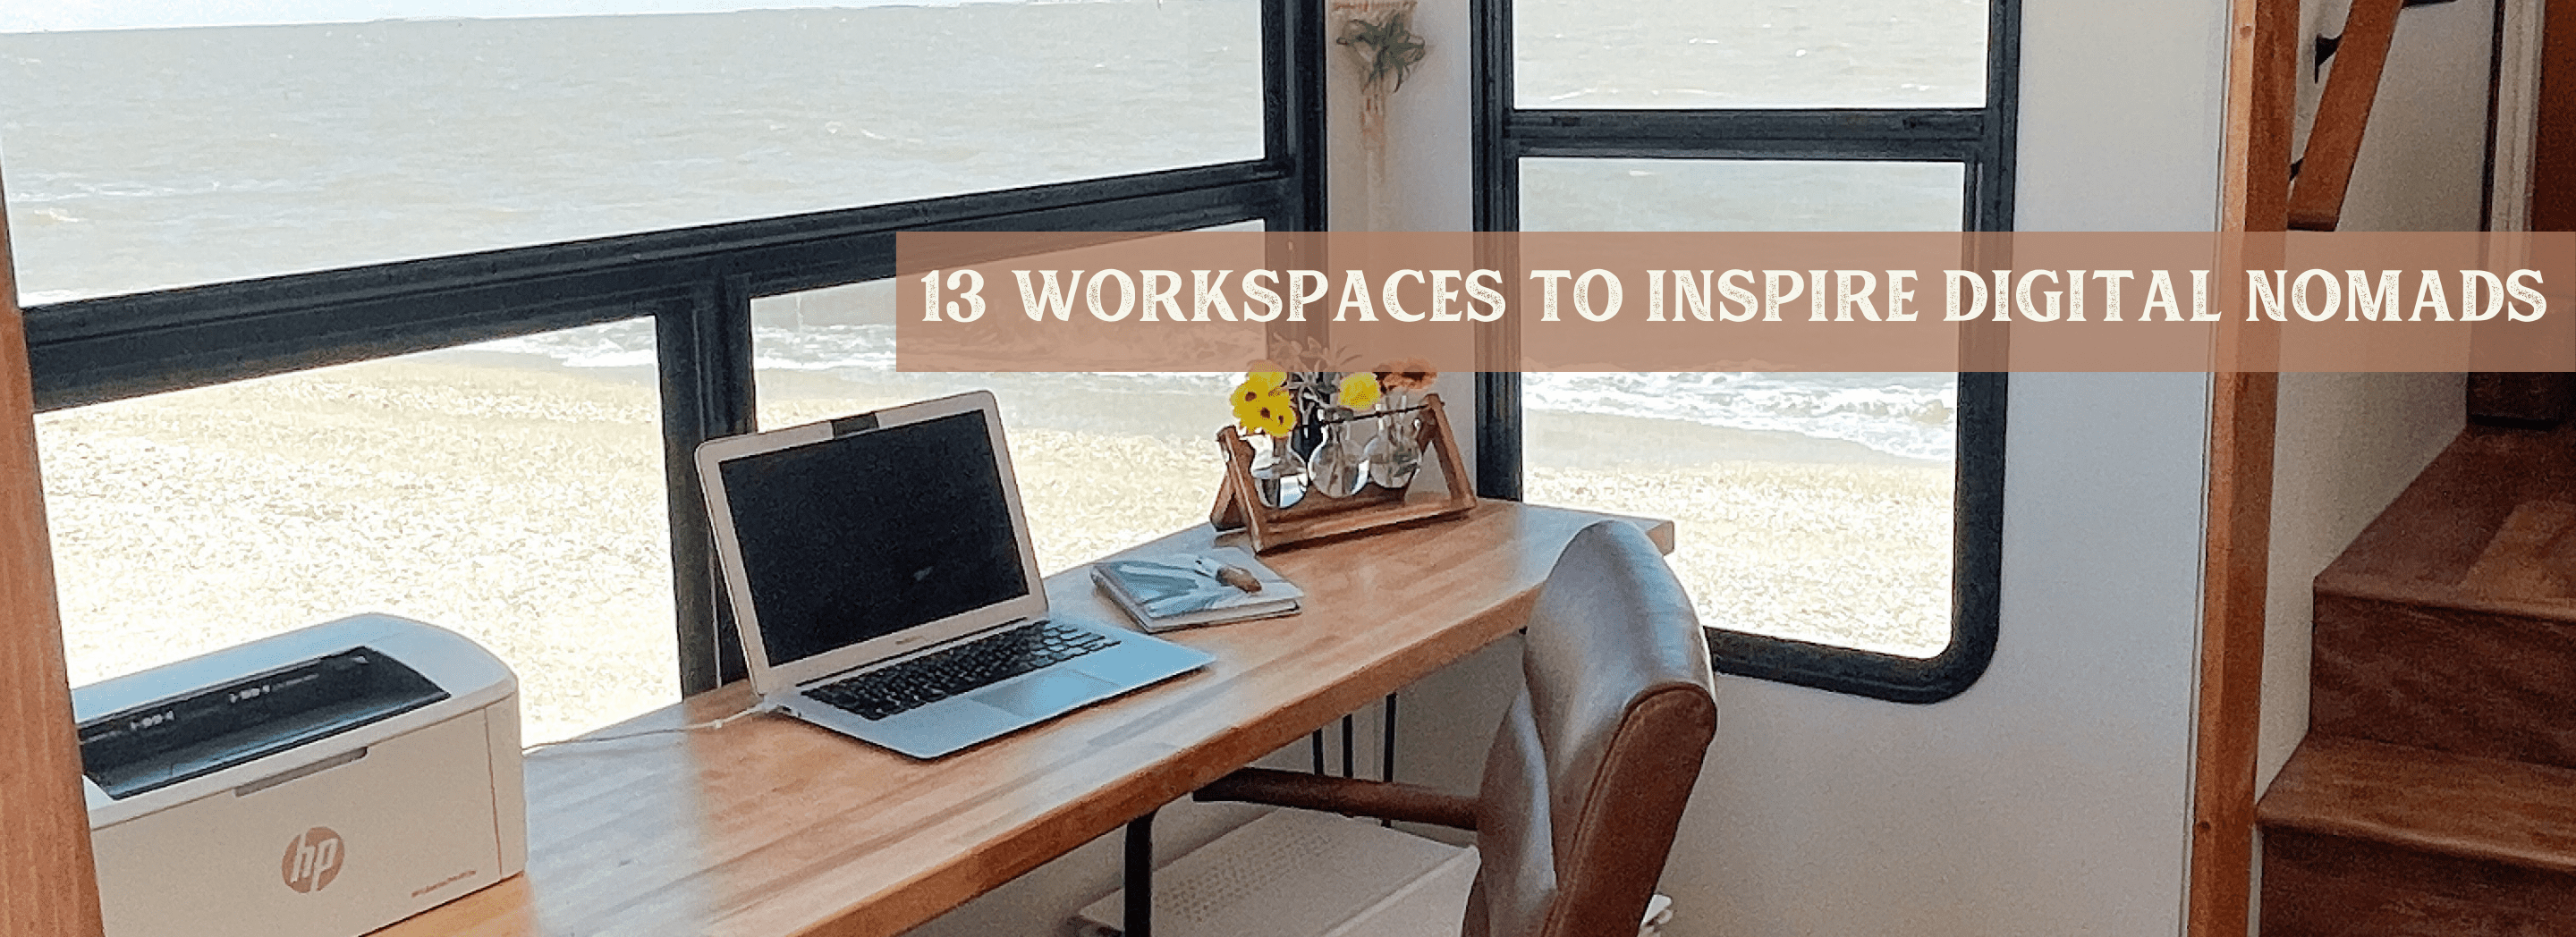 Mobile Offices for Worksites